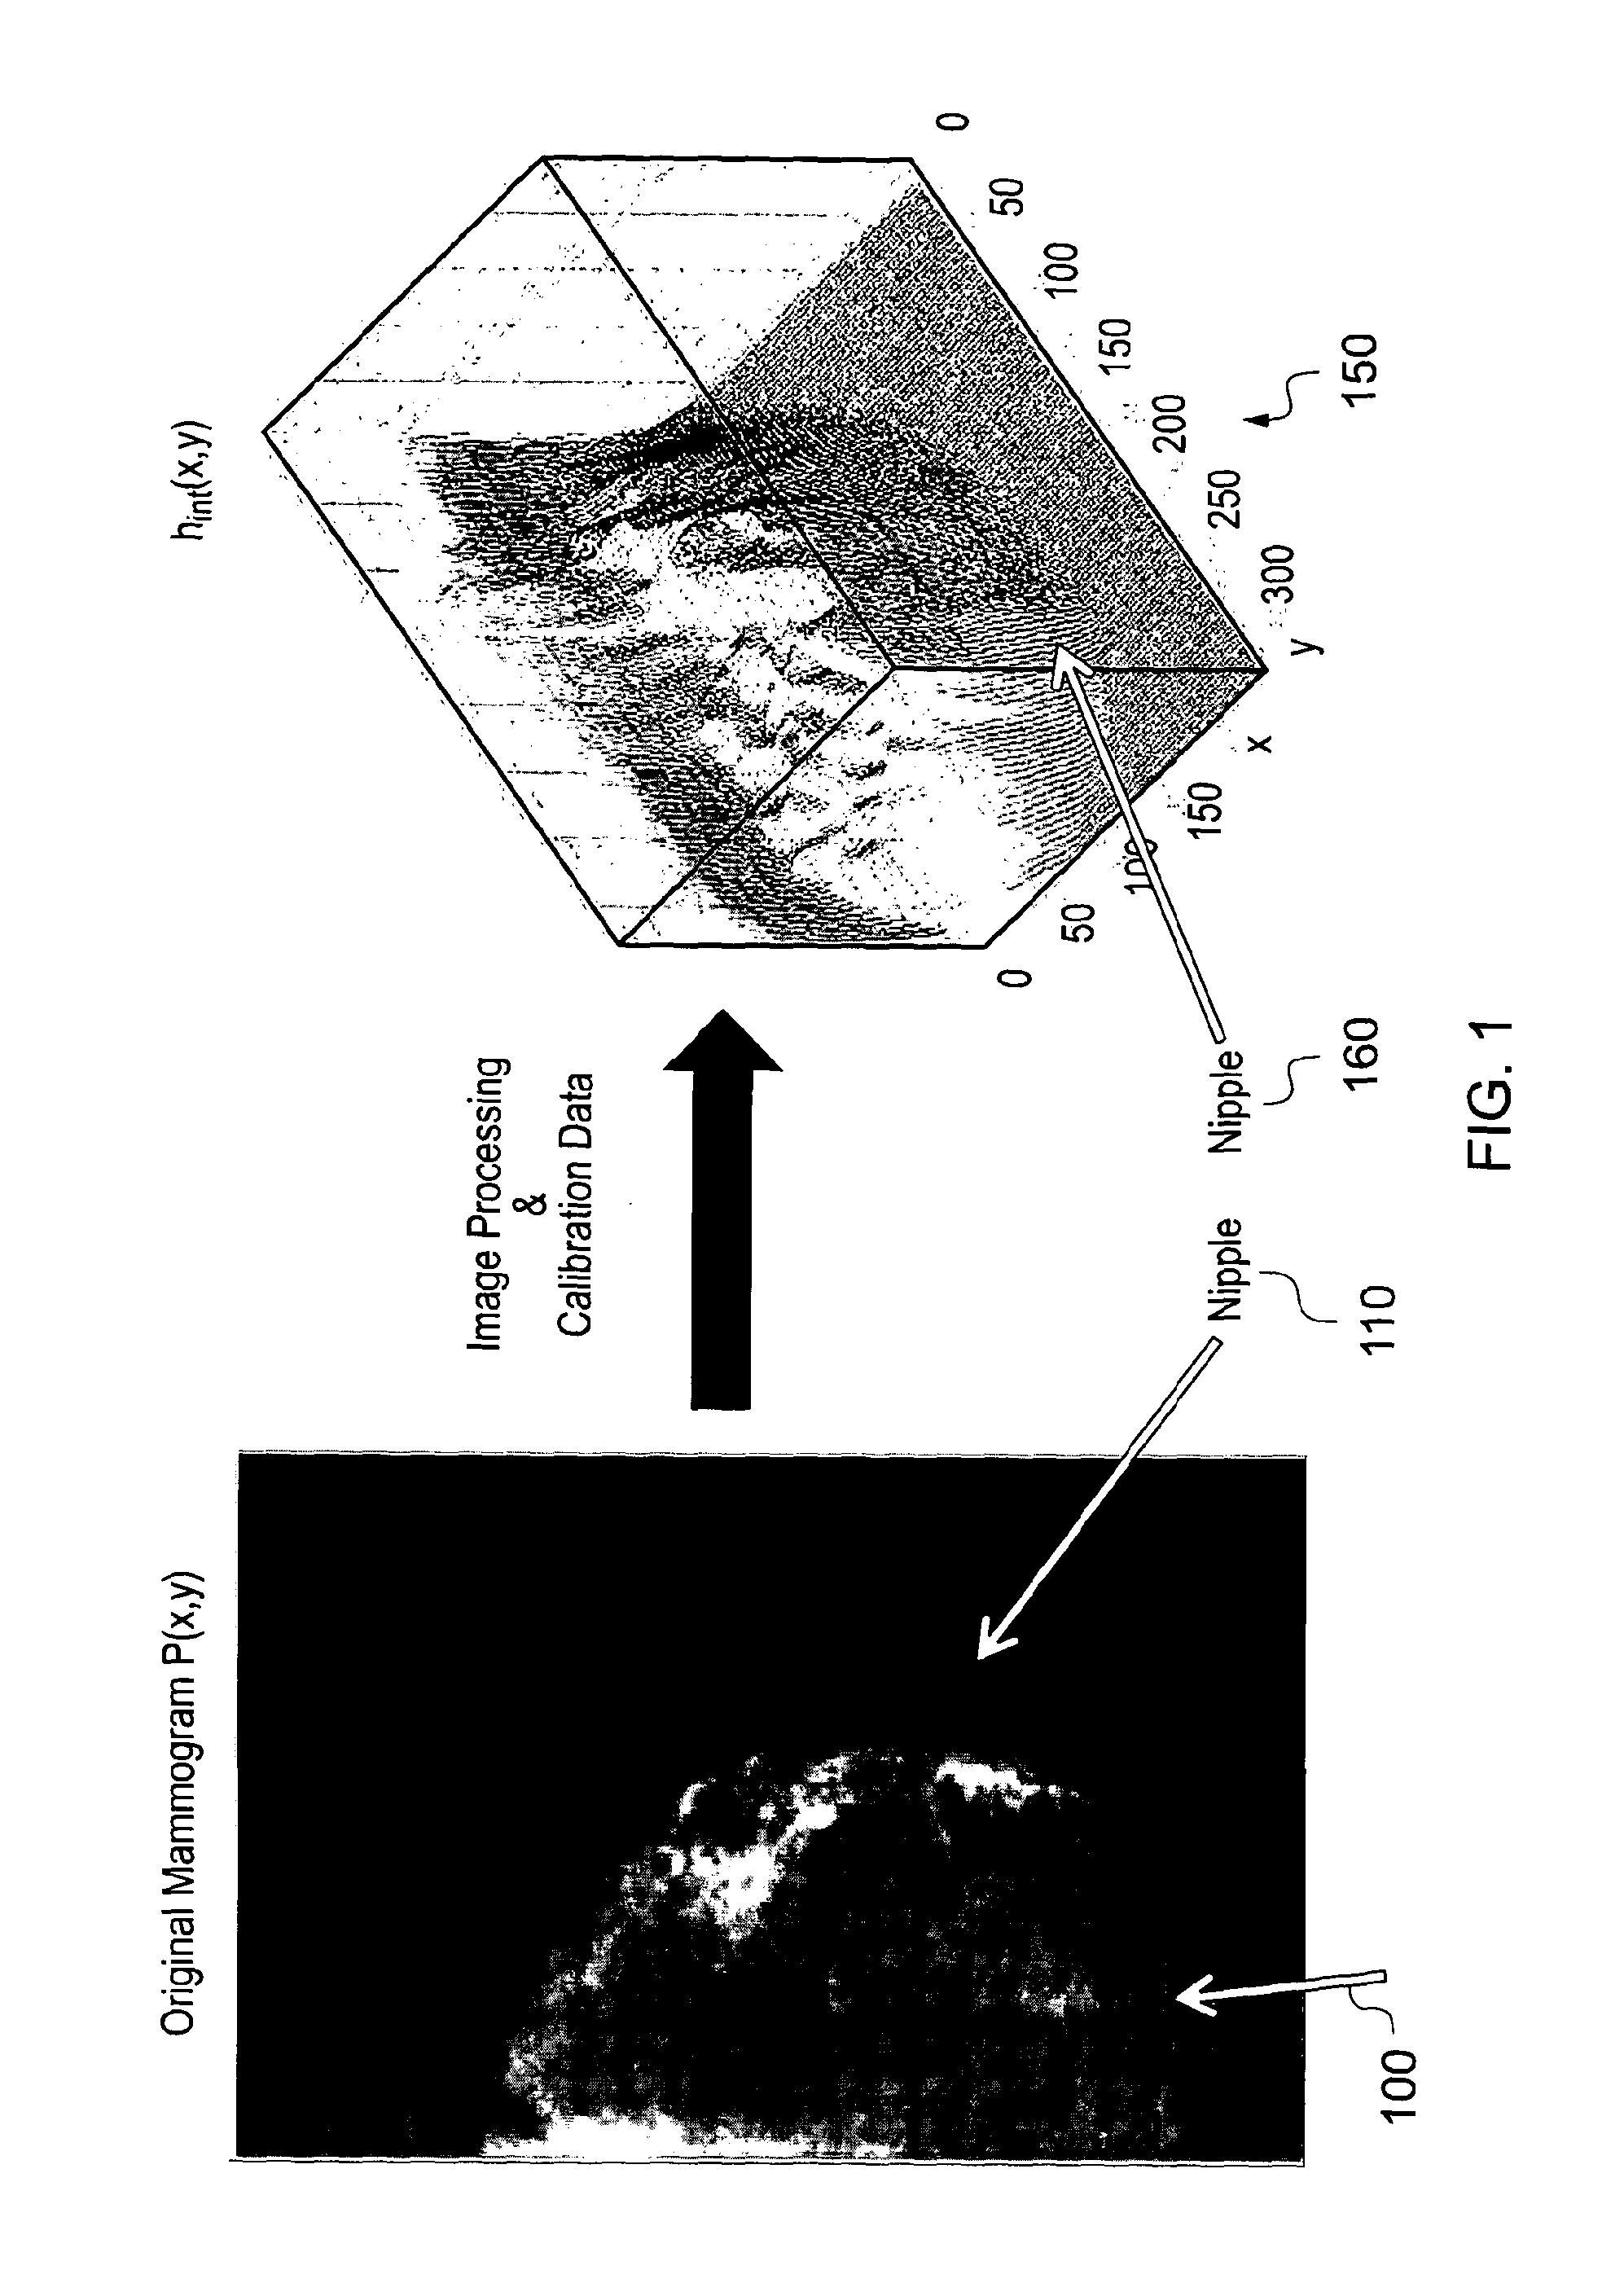 Method and system for analysing tissue from images